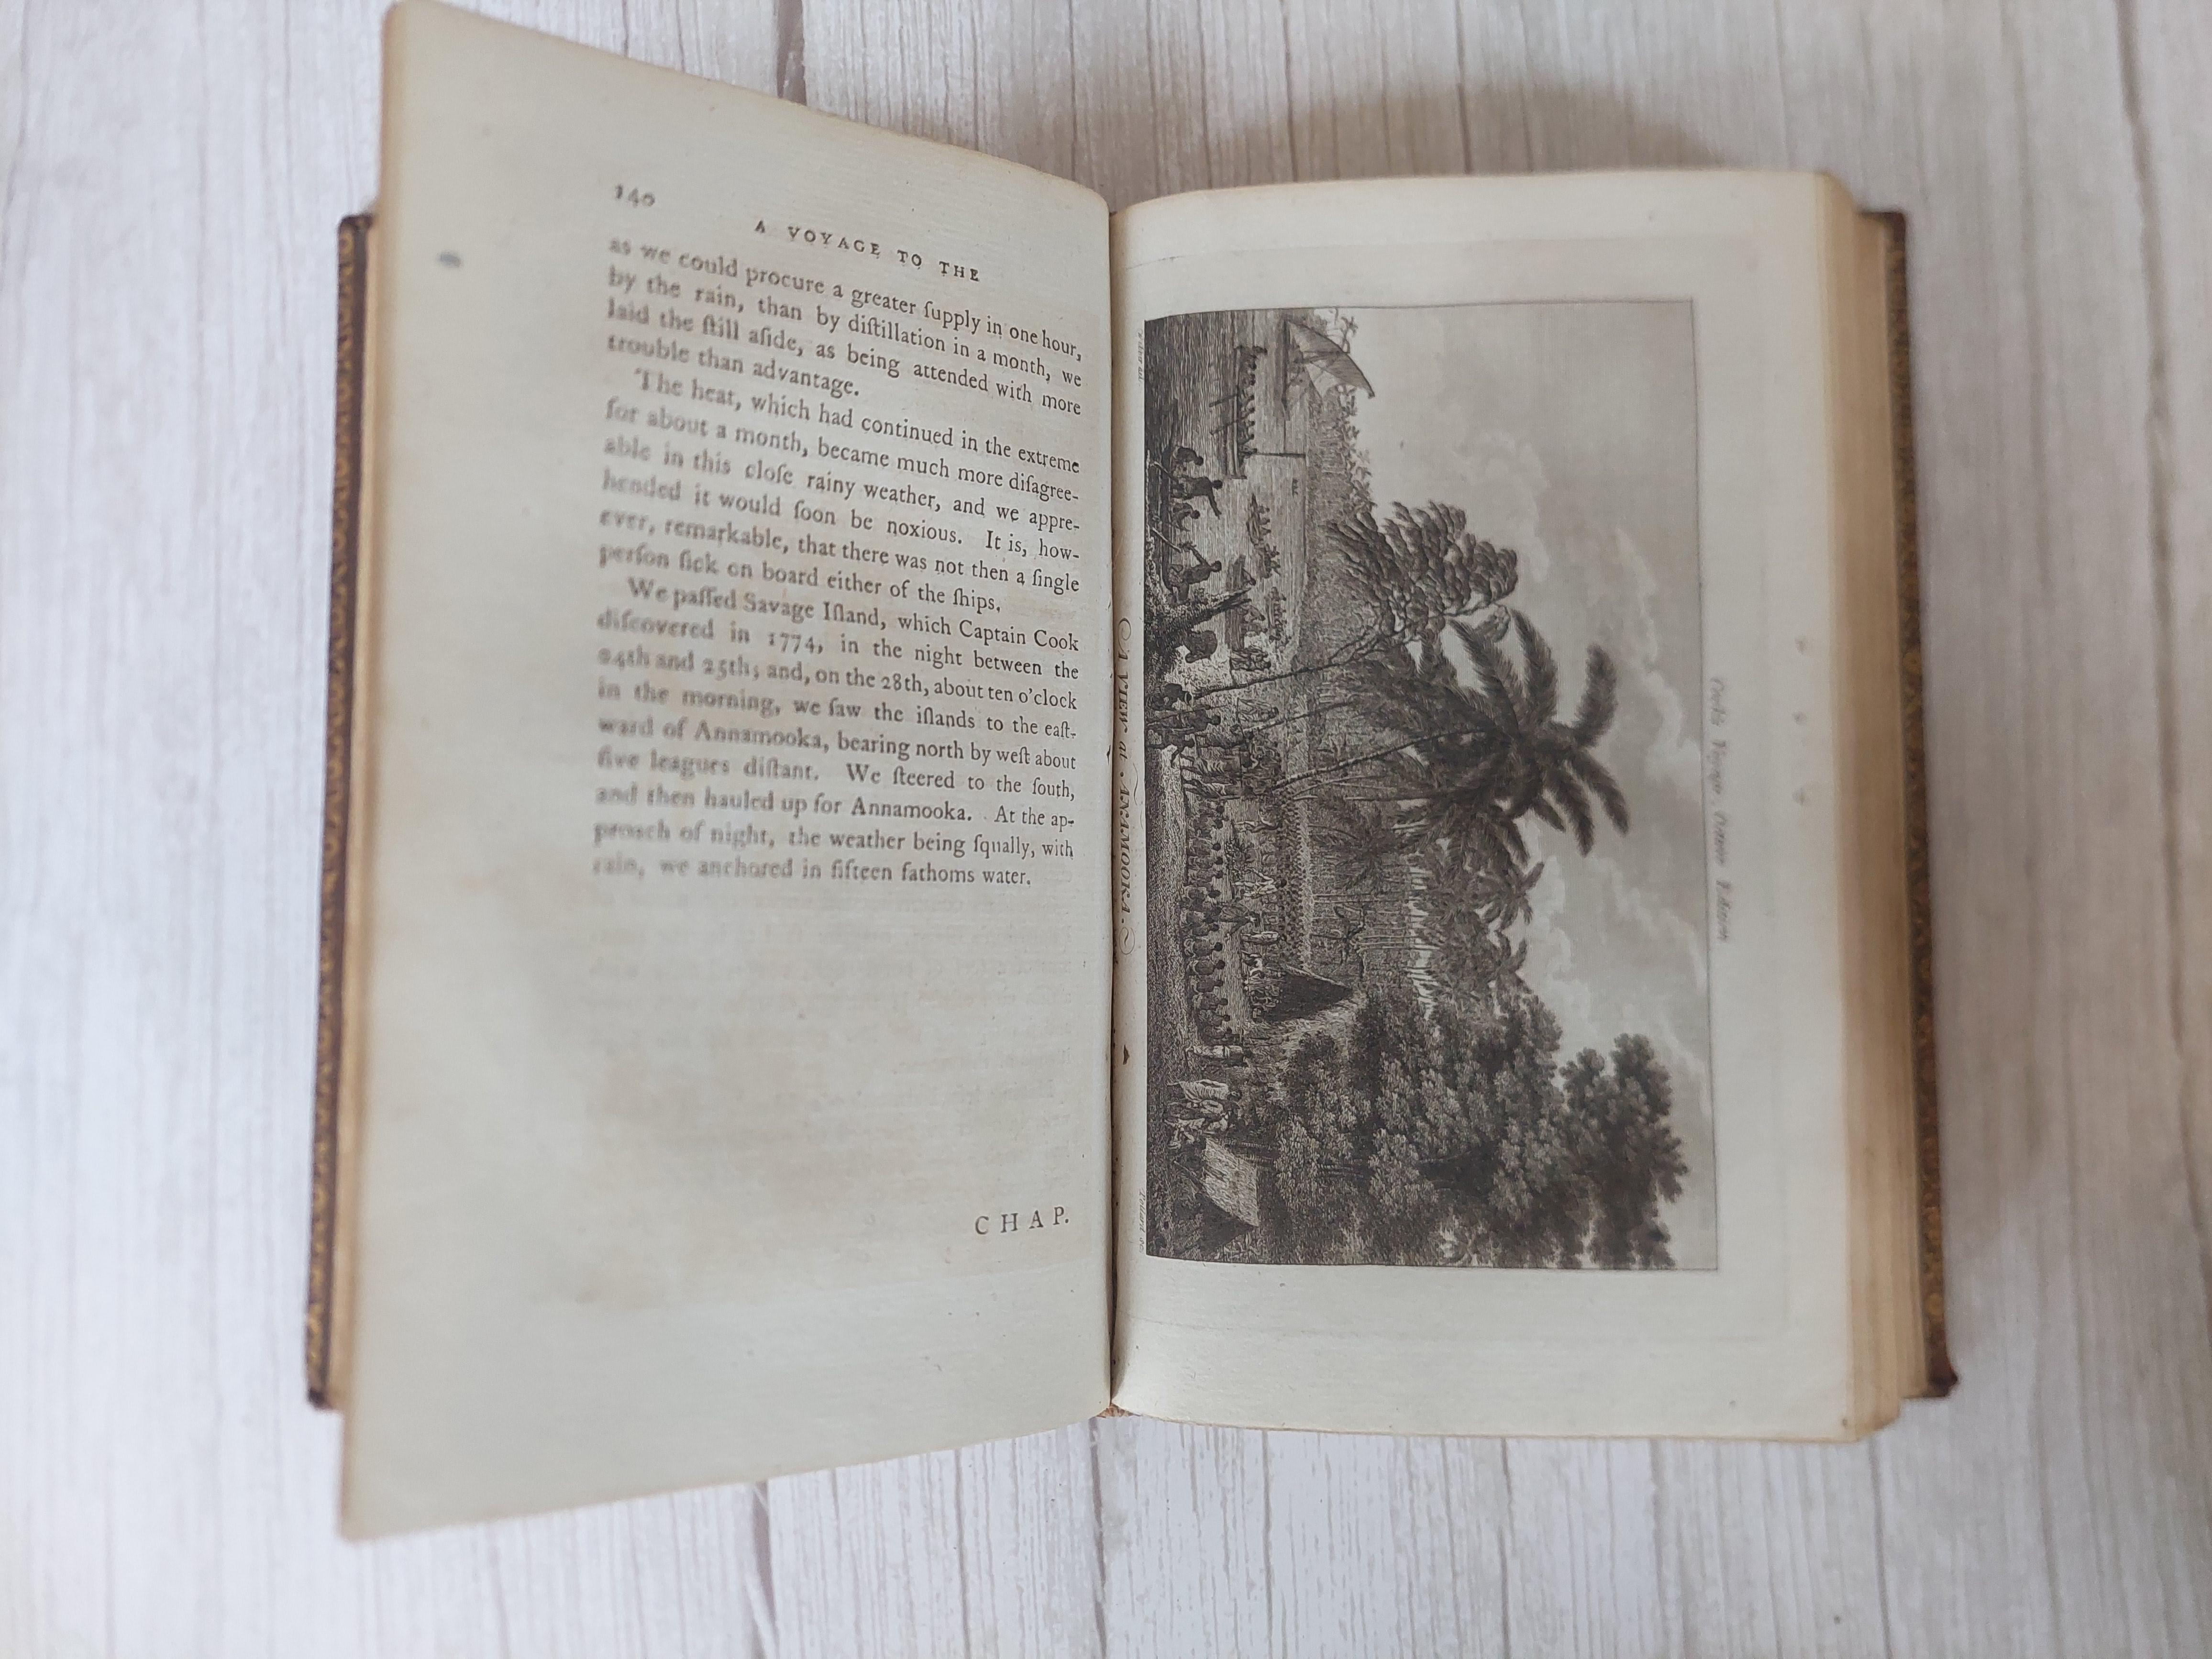 Cook (James). A Voyage to the Pacific Ocean..., vols. 1-3 only (of 4), 1784.

Cook (James). A Voyage to the Pacific Ocean; undertaken by command of His Majesty, for making discoveries in the northern hemisphere: performed under the direction of